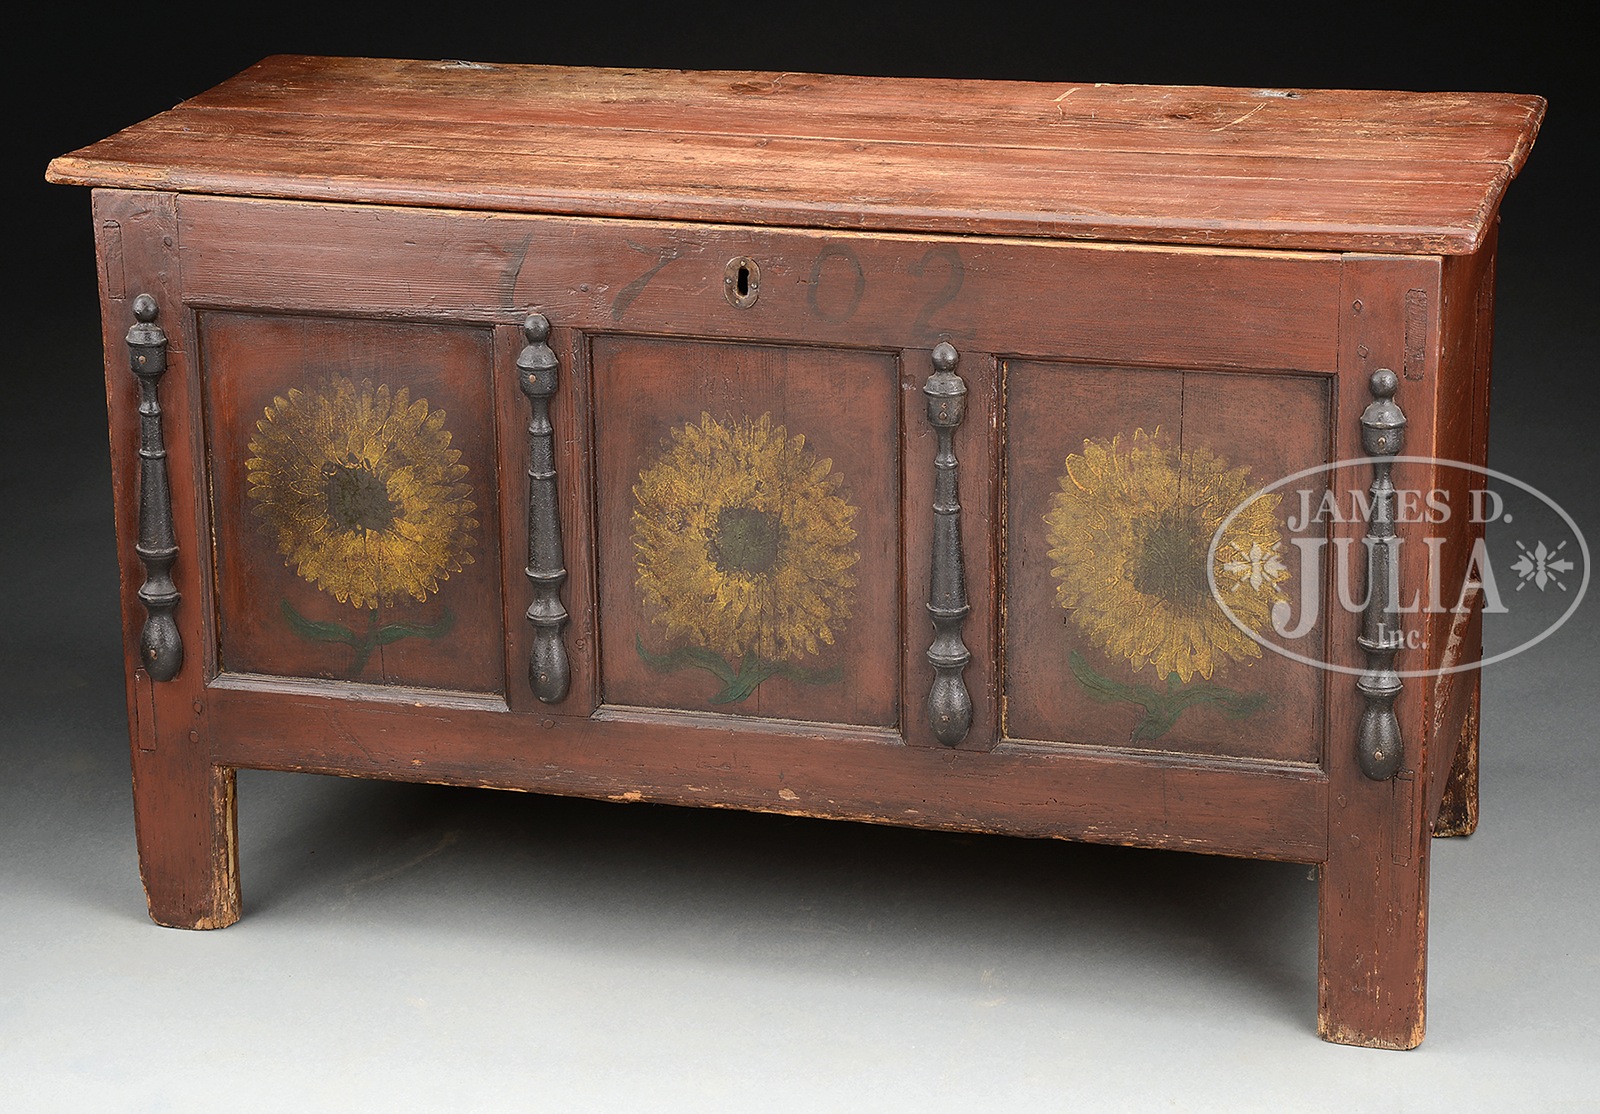 EARLY AMERICAN PAINT DECORATED BLANKET CHEST. 18th Century, probably Pennsylvania. This nice early